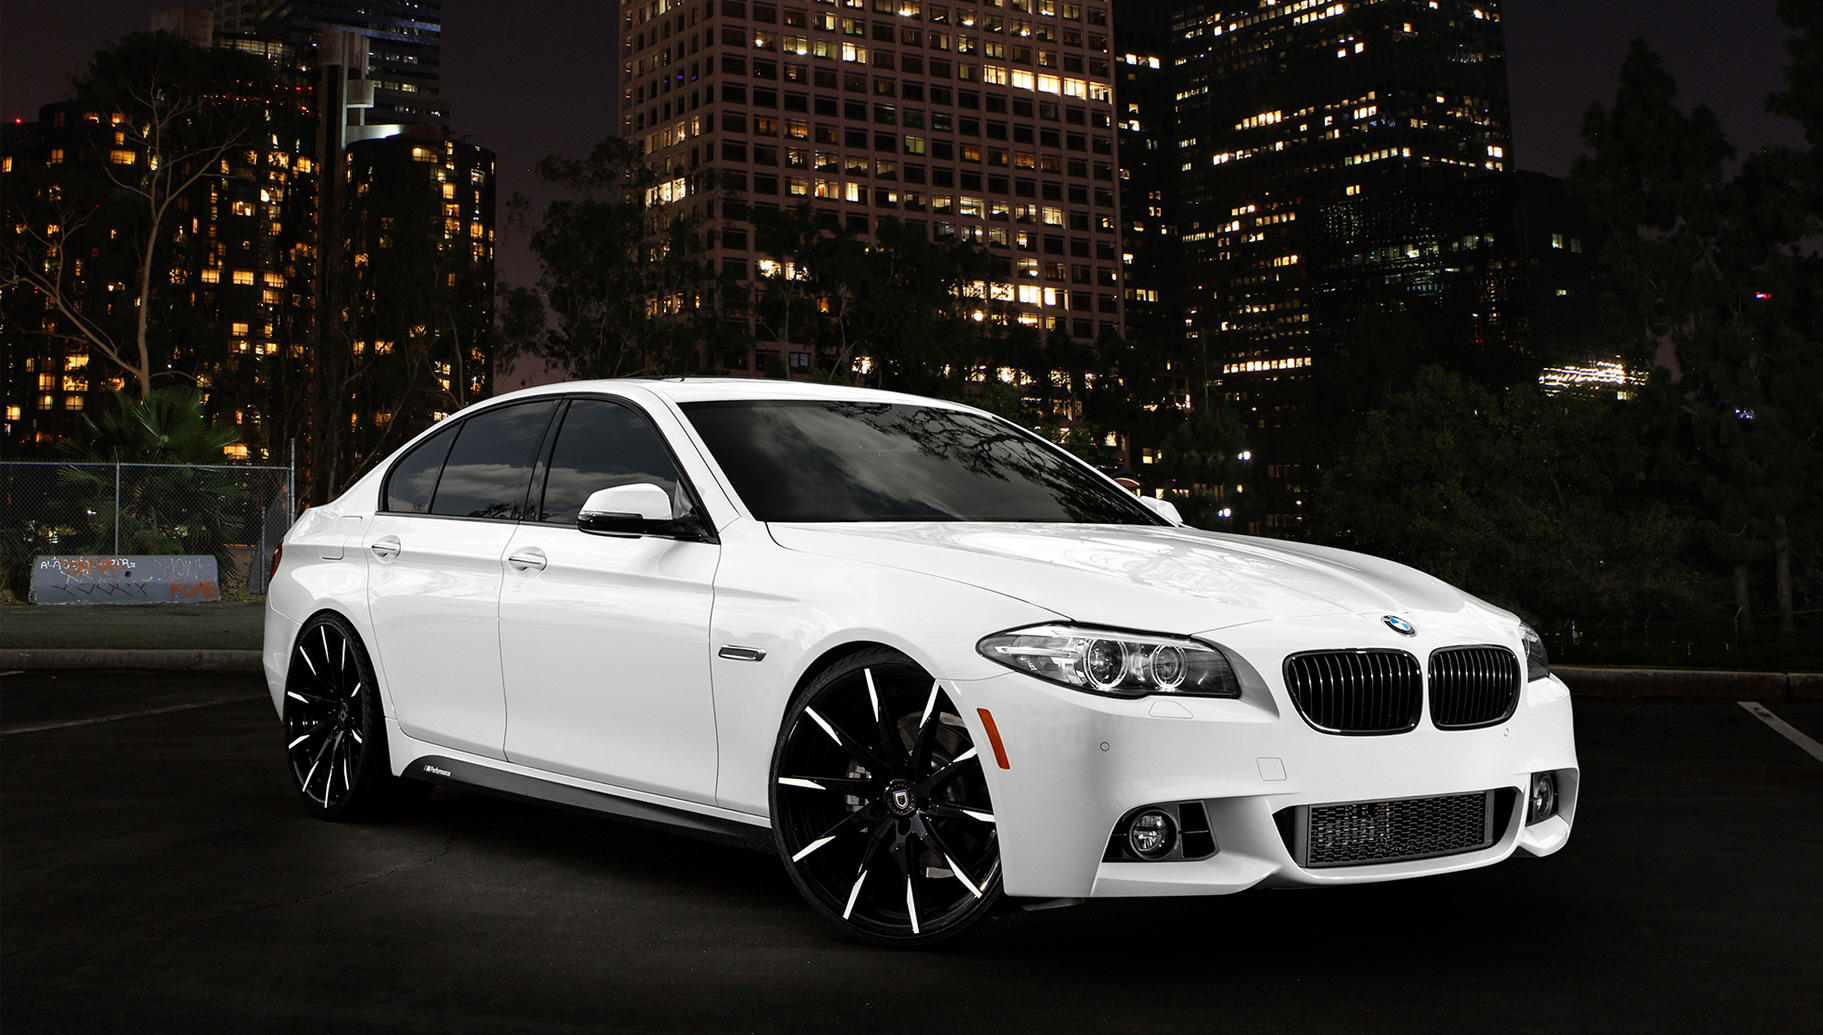 Cheap rims for bmw 528i #6